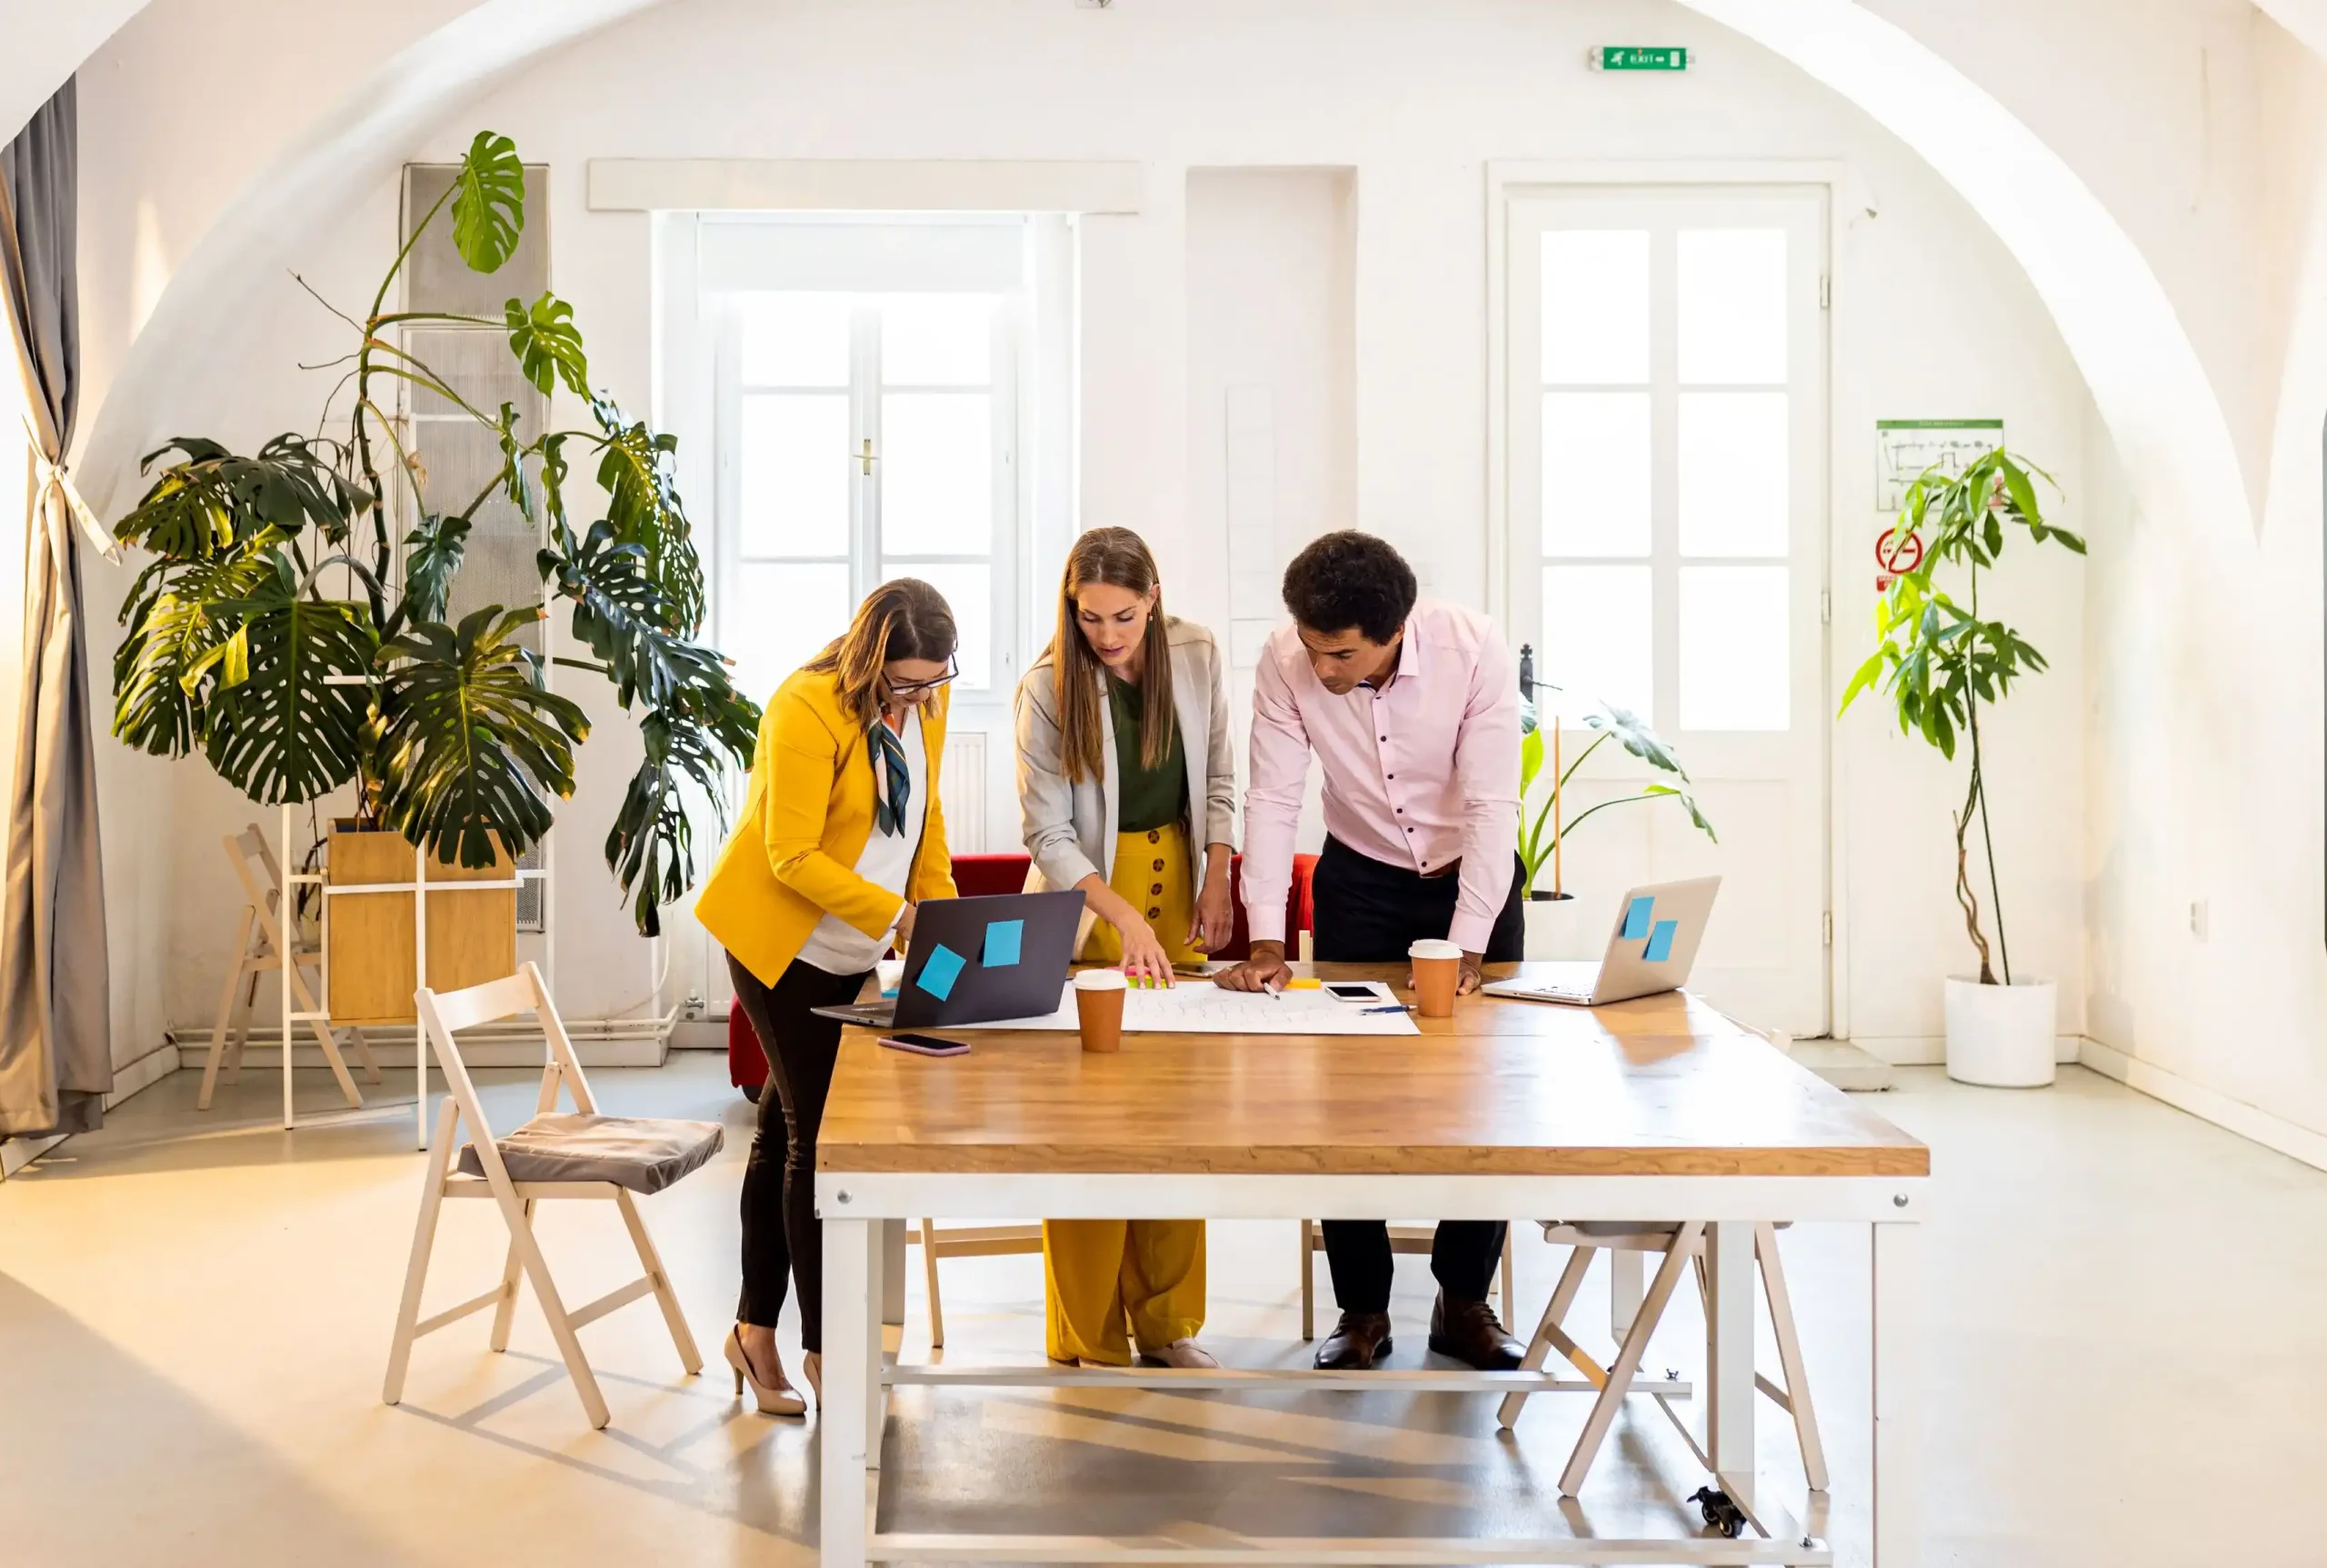 Virtual Office v. CoWorking Space, which is right for you?